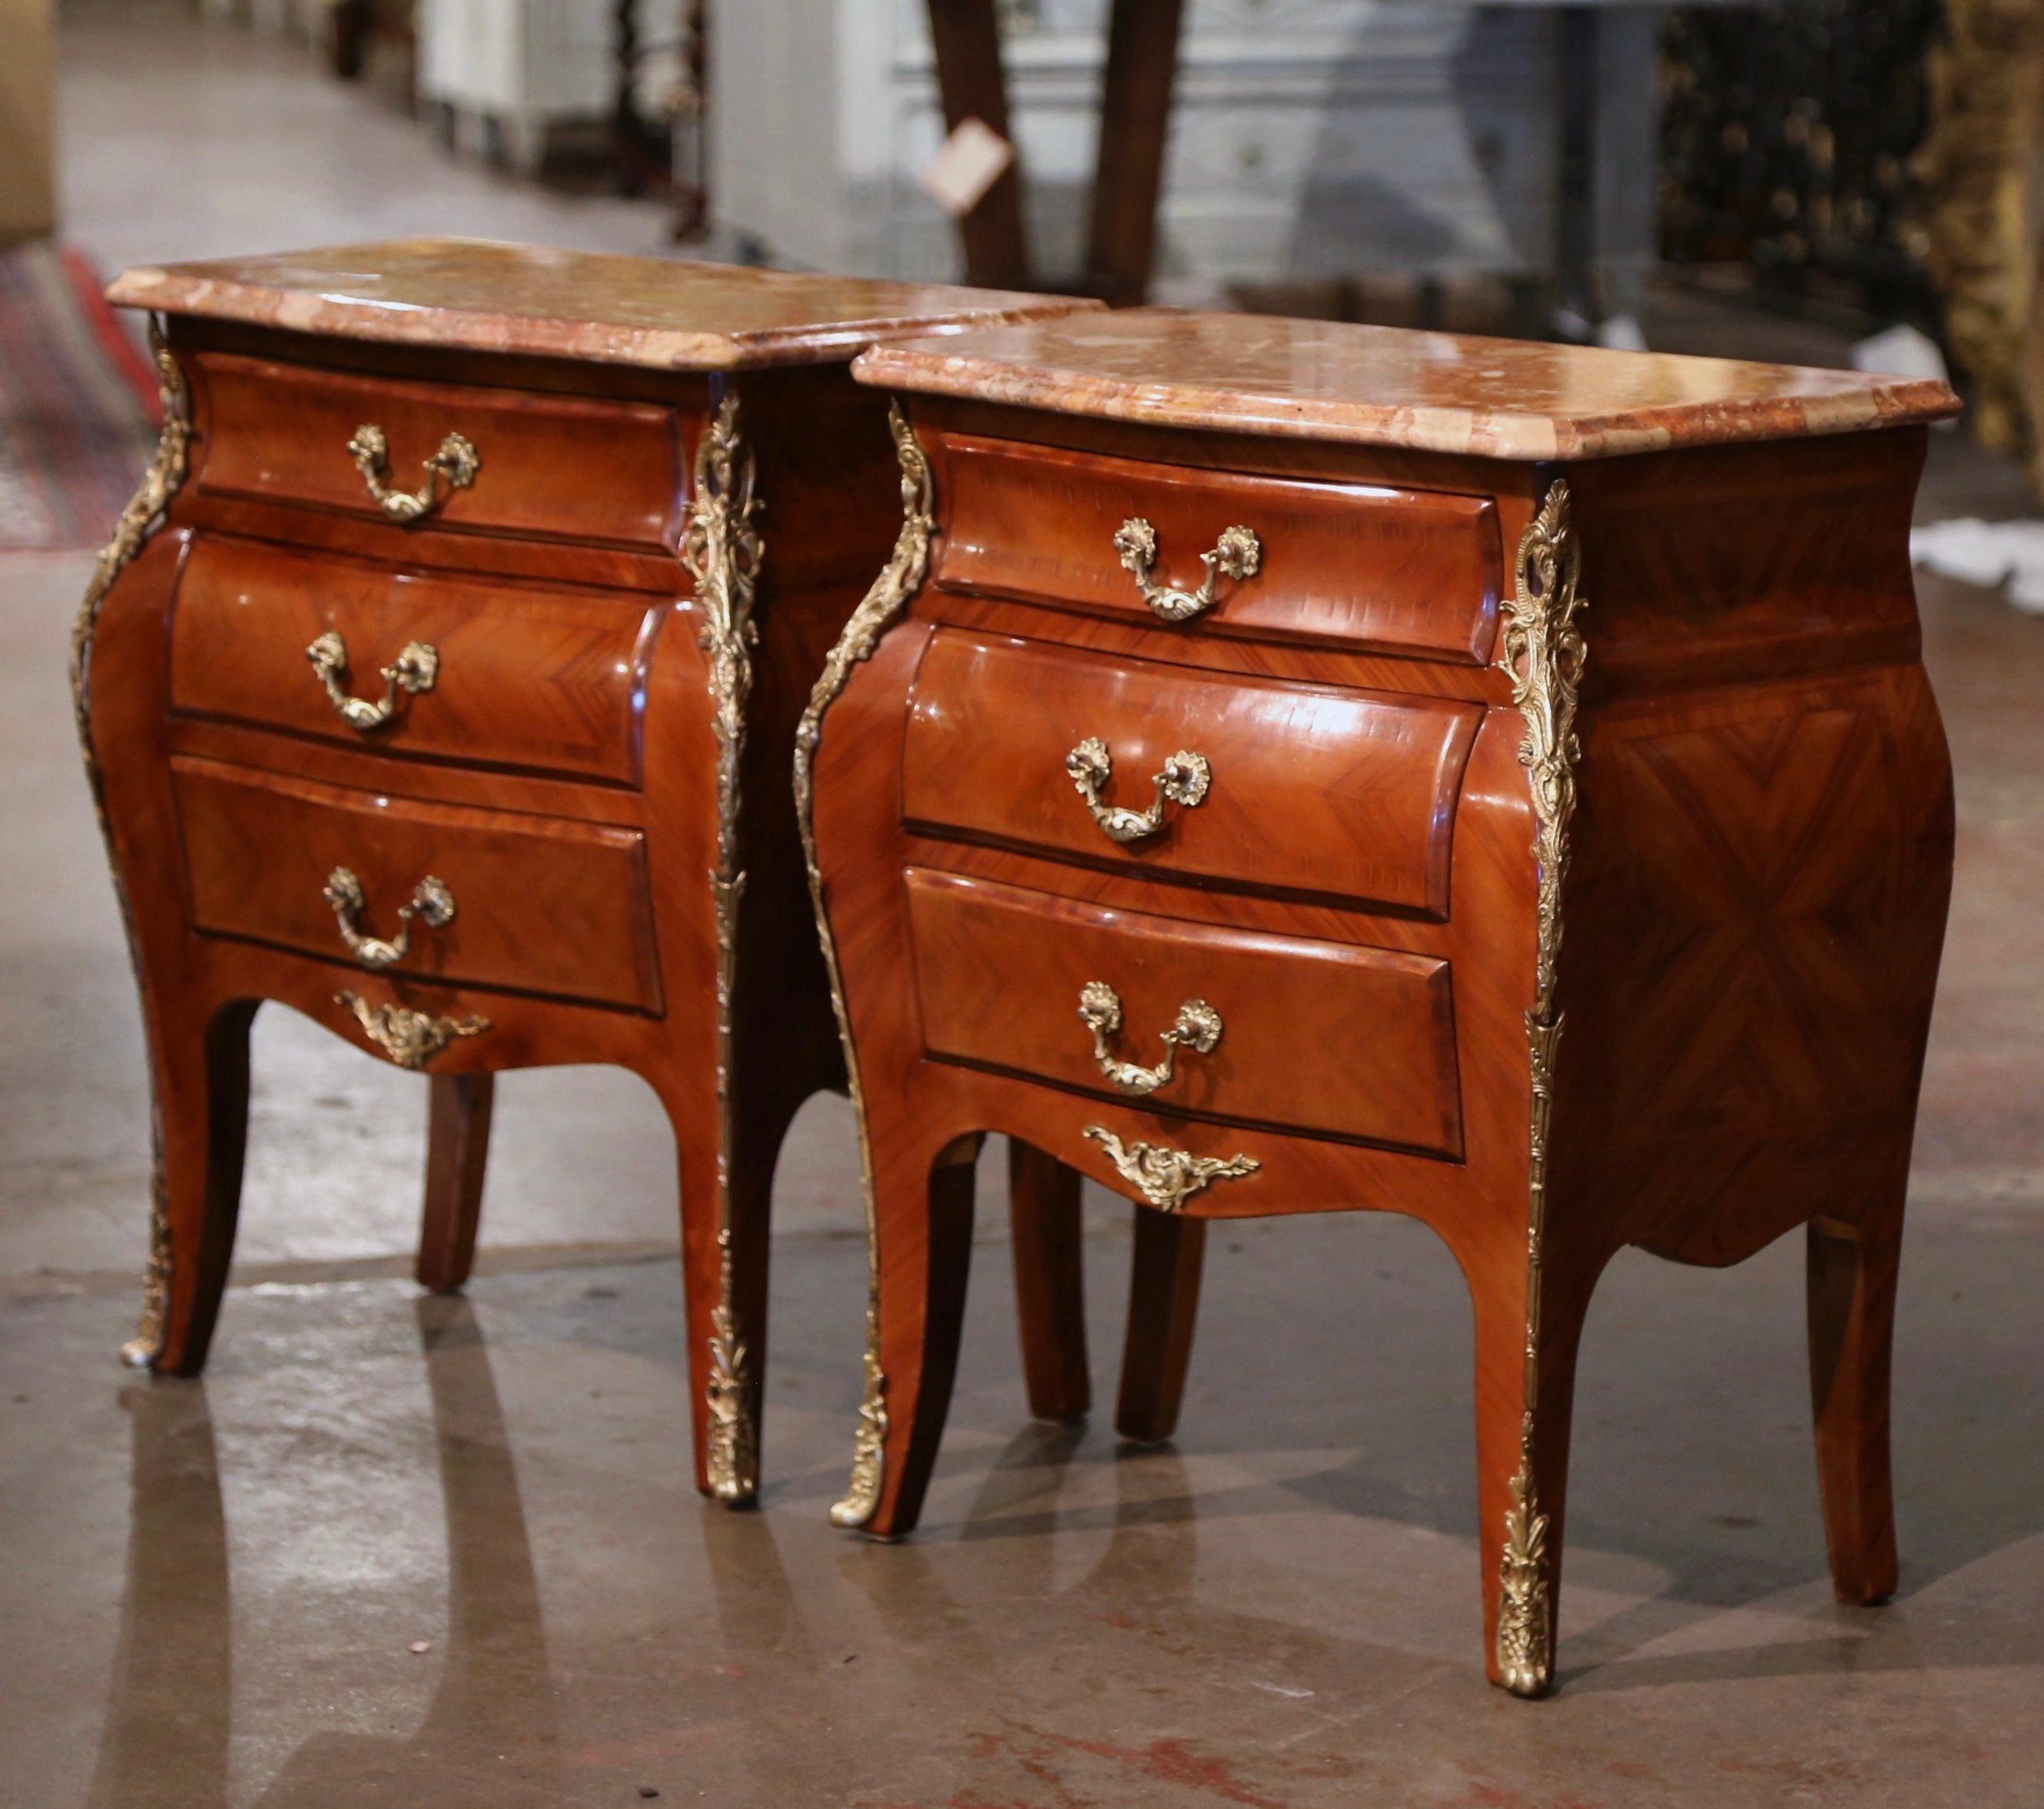 These elegant three-drawer bedside tables were created in France, circa 1970. Bombe in shape on all three sides, each chest stands on cabriole legs ending with bronze sabot feet over a scalloped apron embellished with a brass mount; the sides with